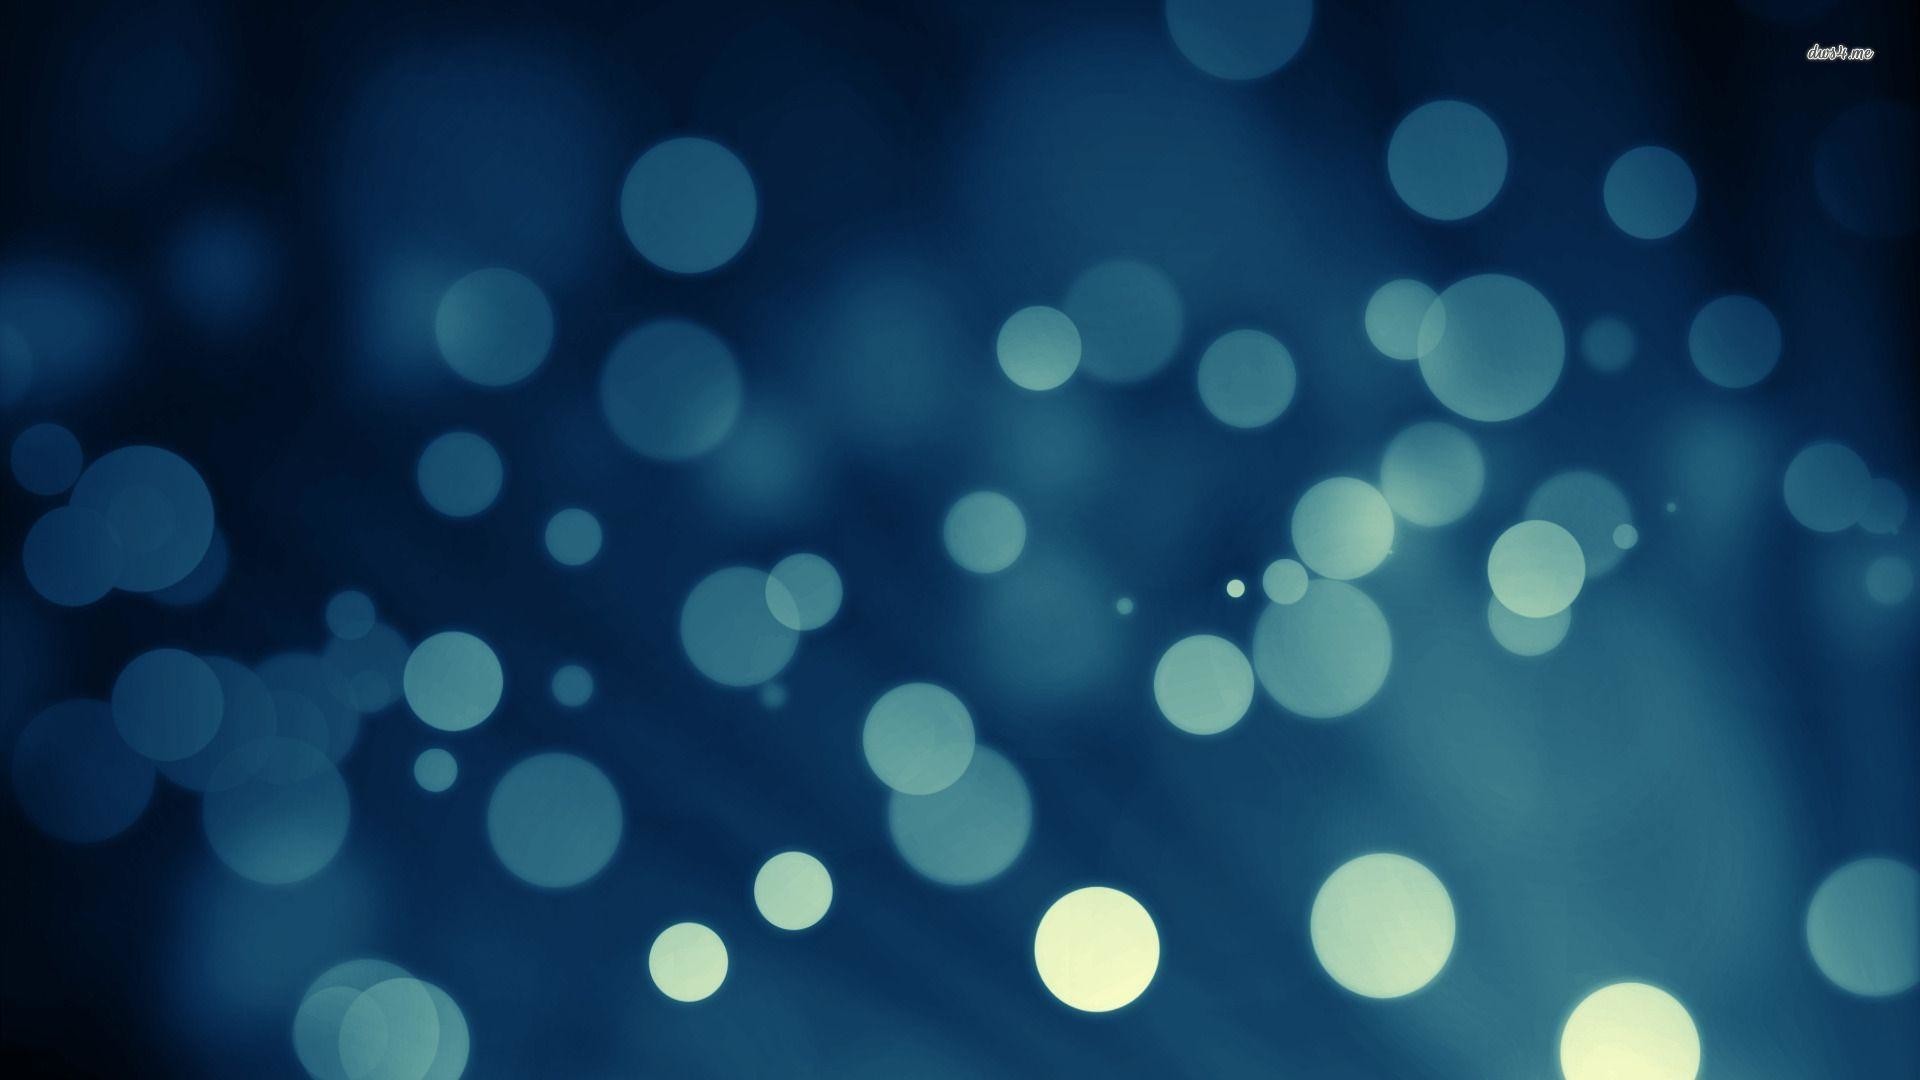 1920x1080  Wallpapers For > Blue Bubbles Wallpaper Hd